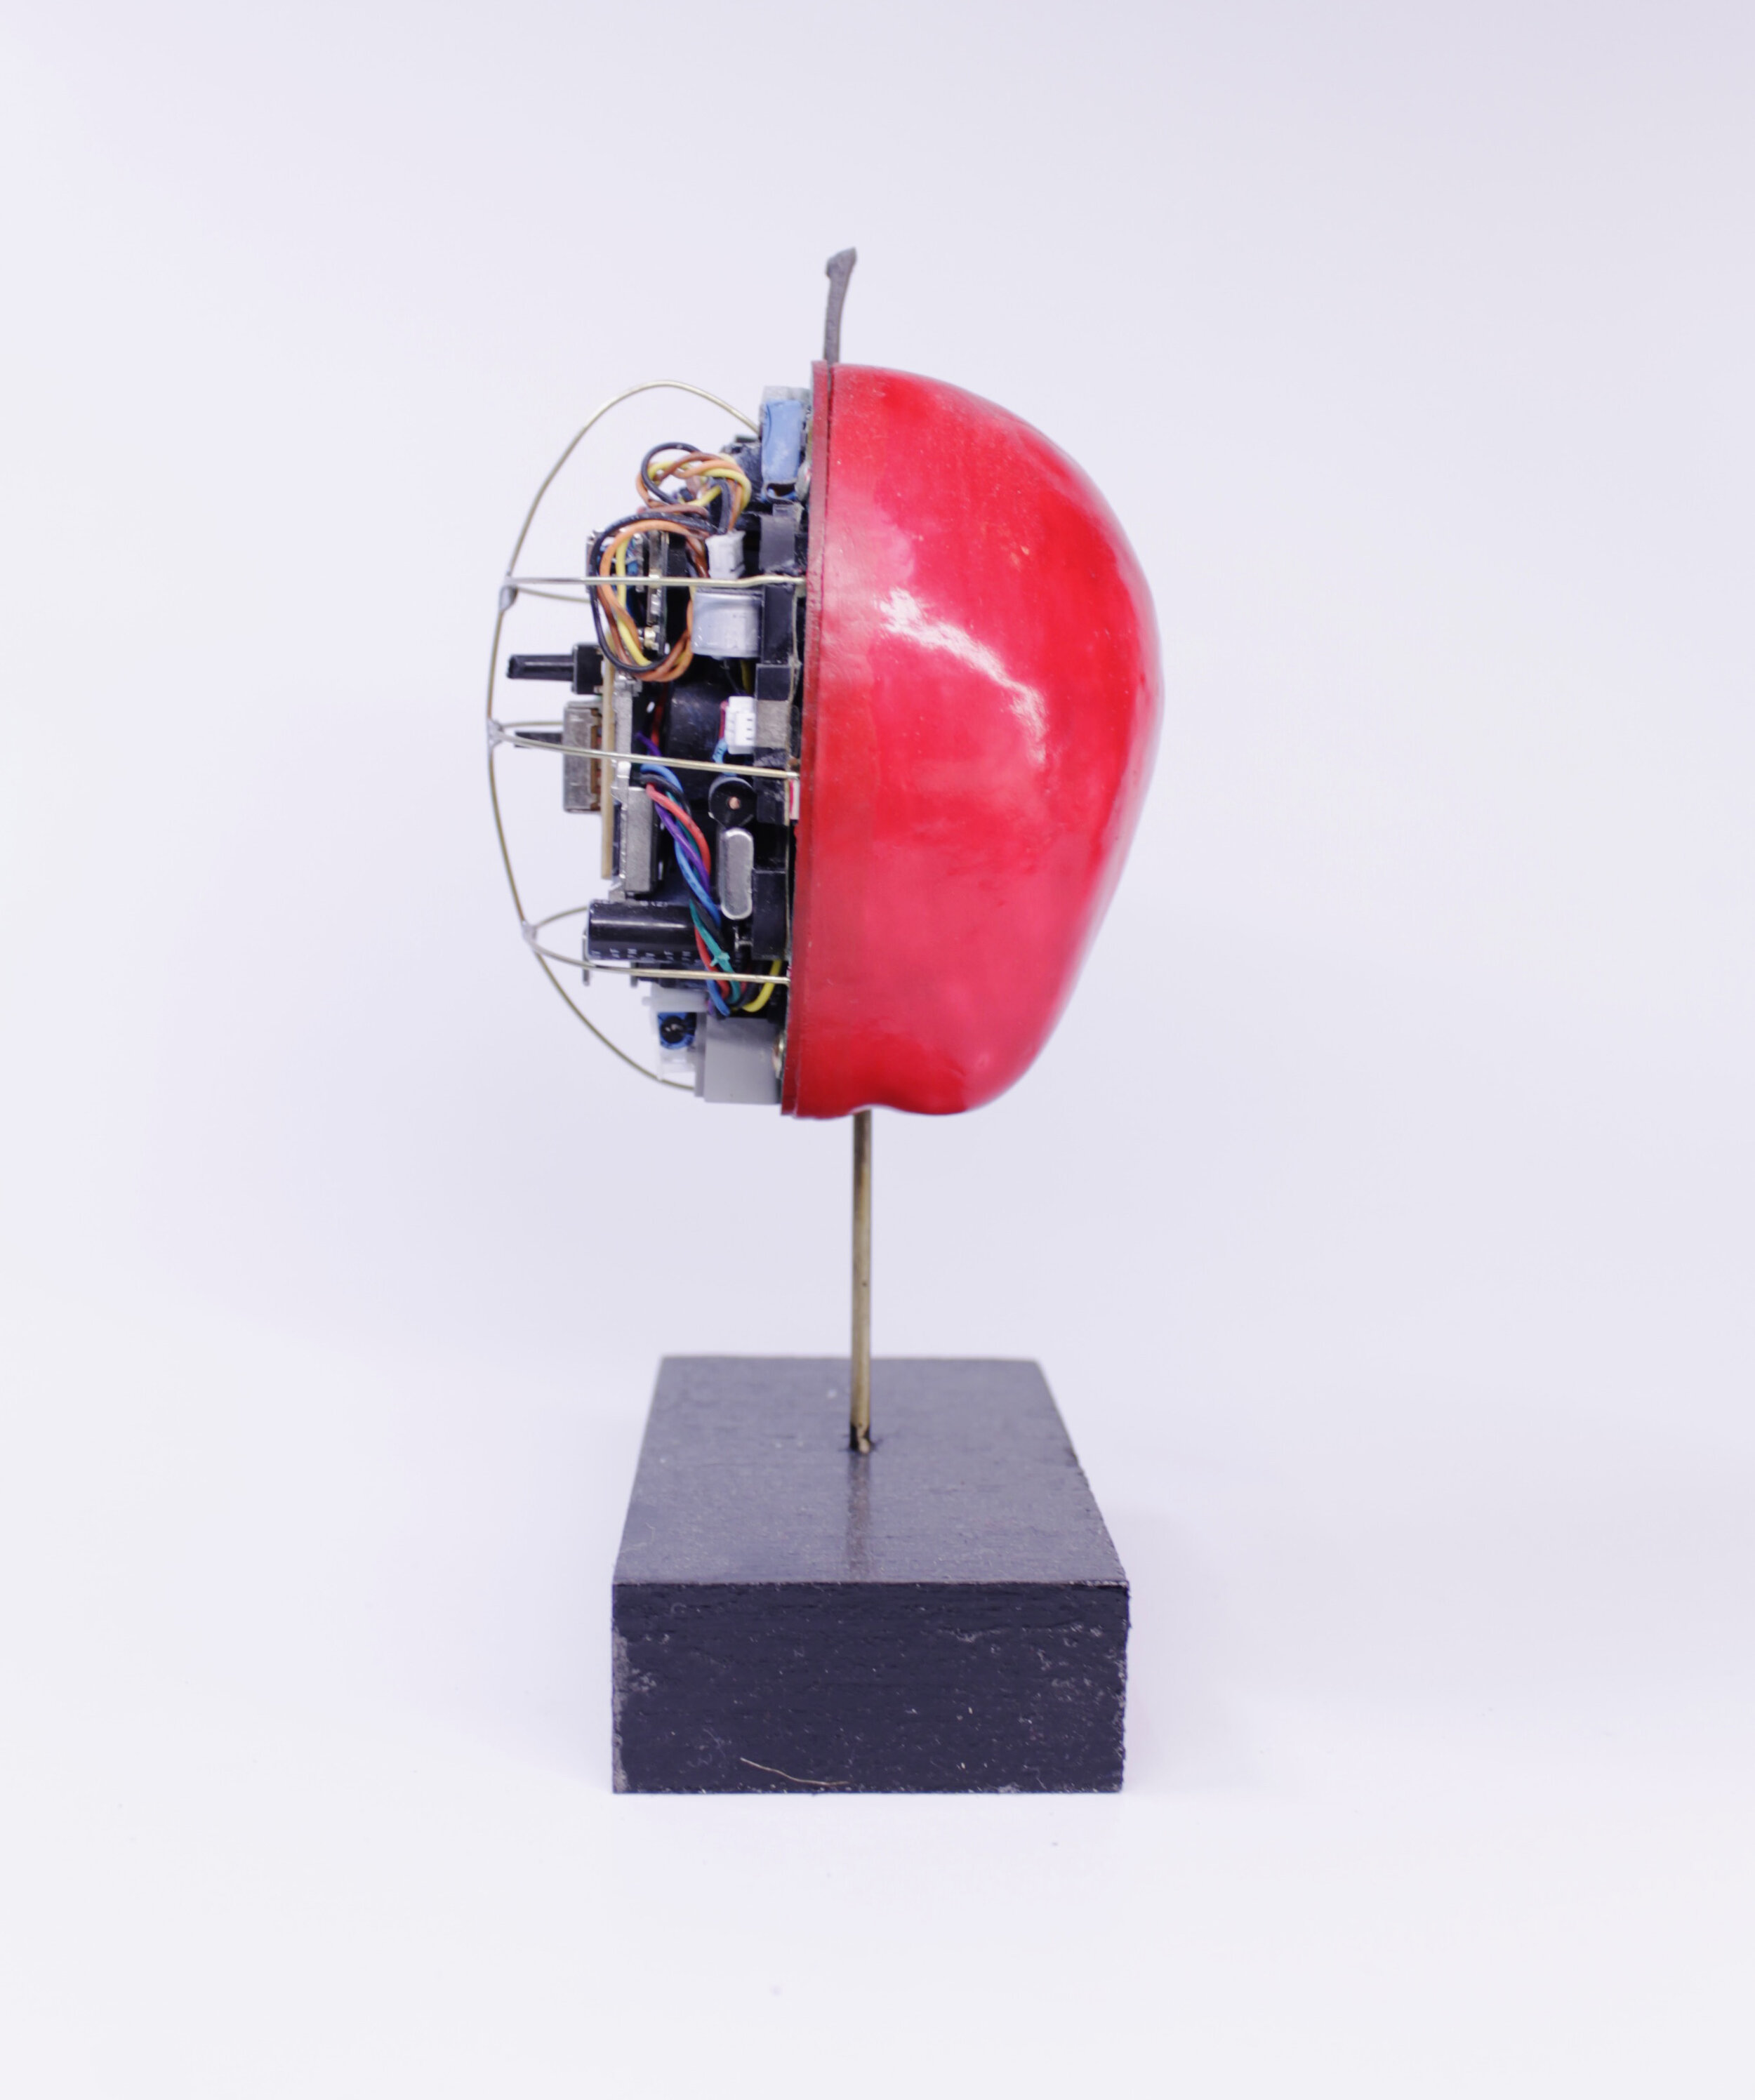 The Electric Apple - £150